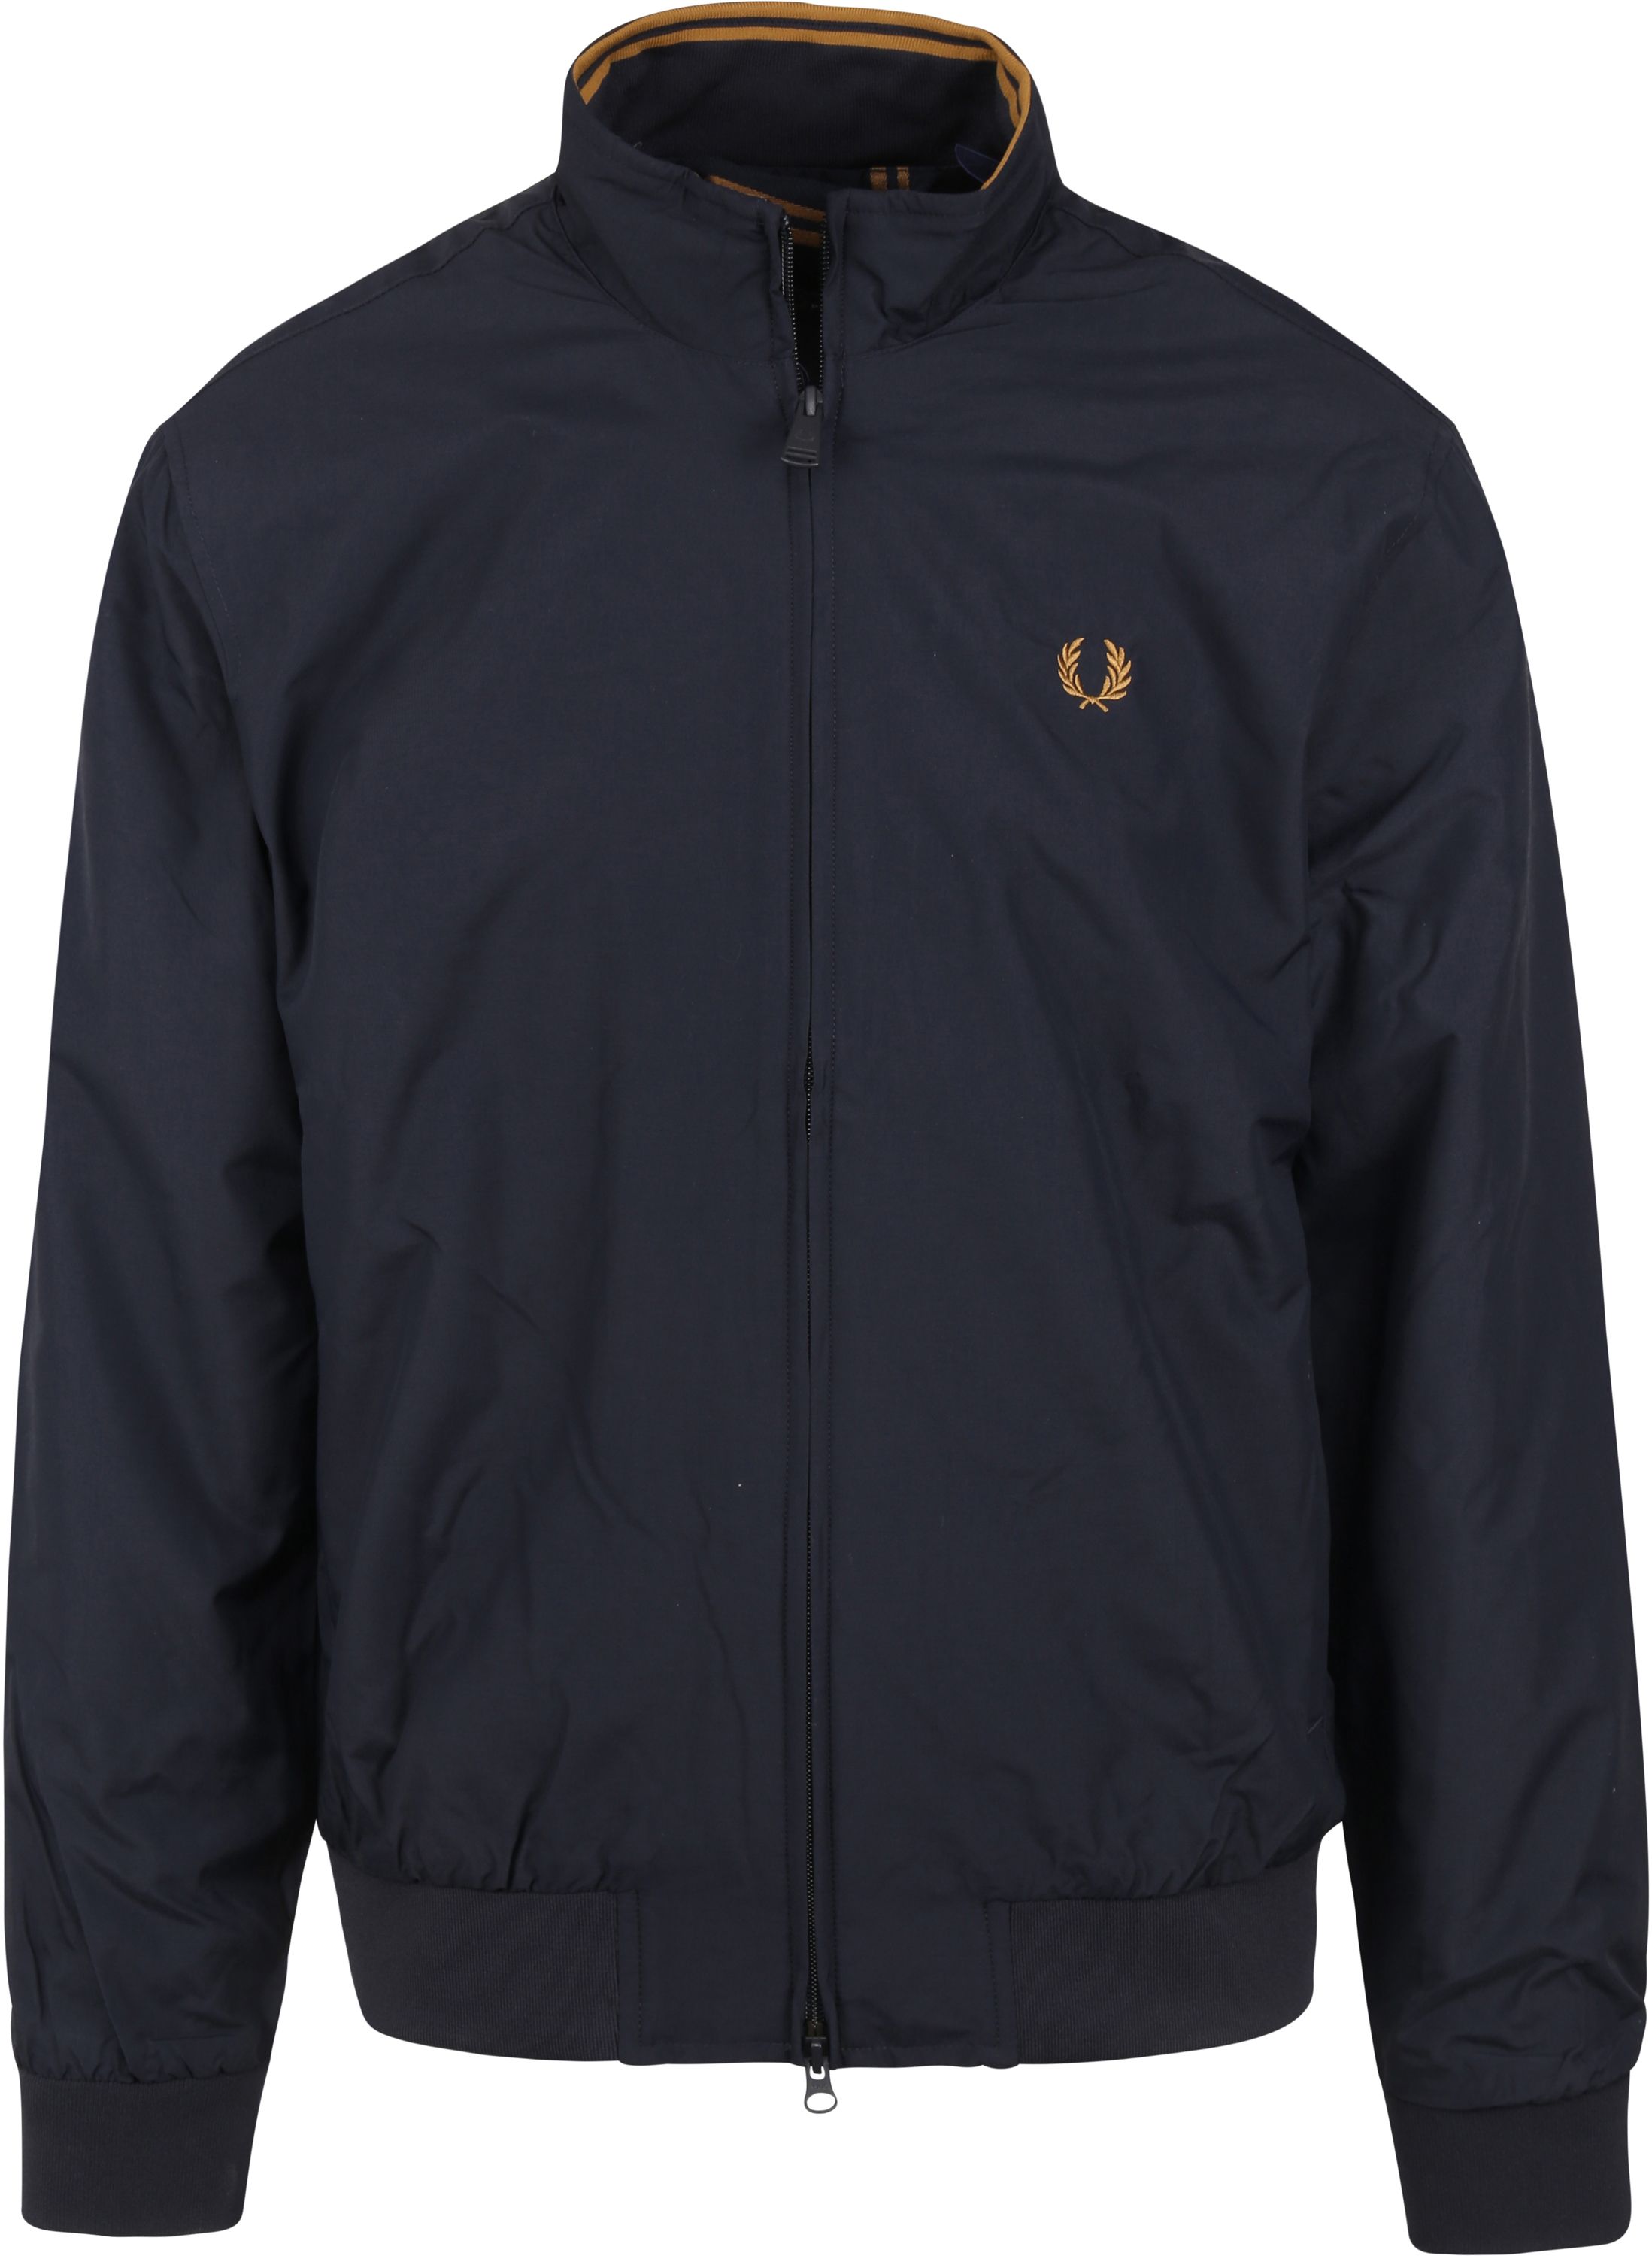 Fred Perry Jacket Brentham Navy Dark Blue size M